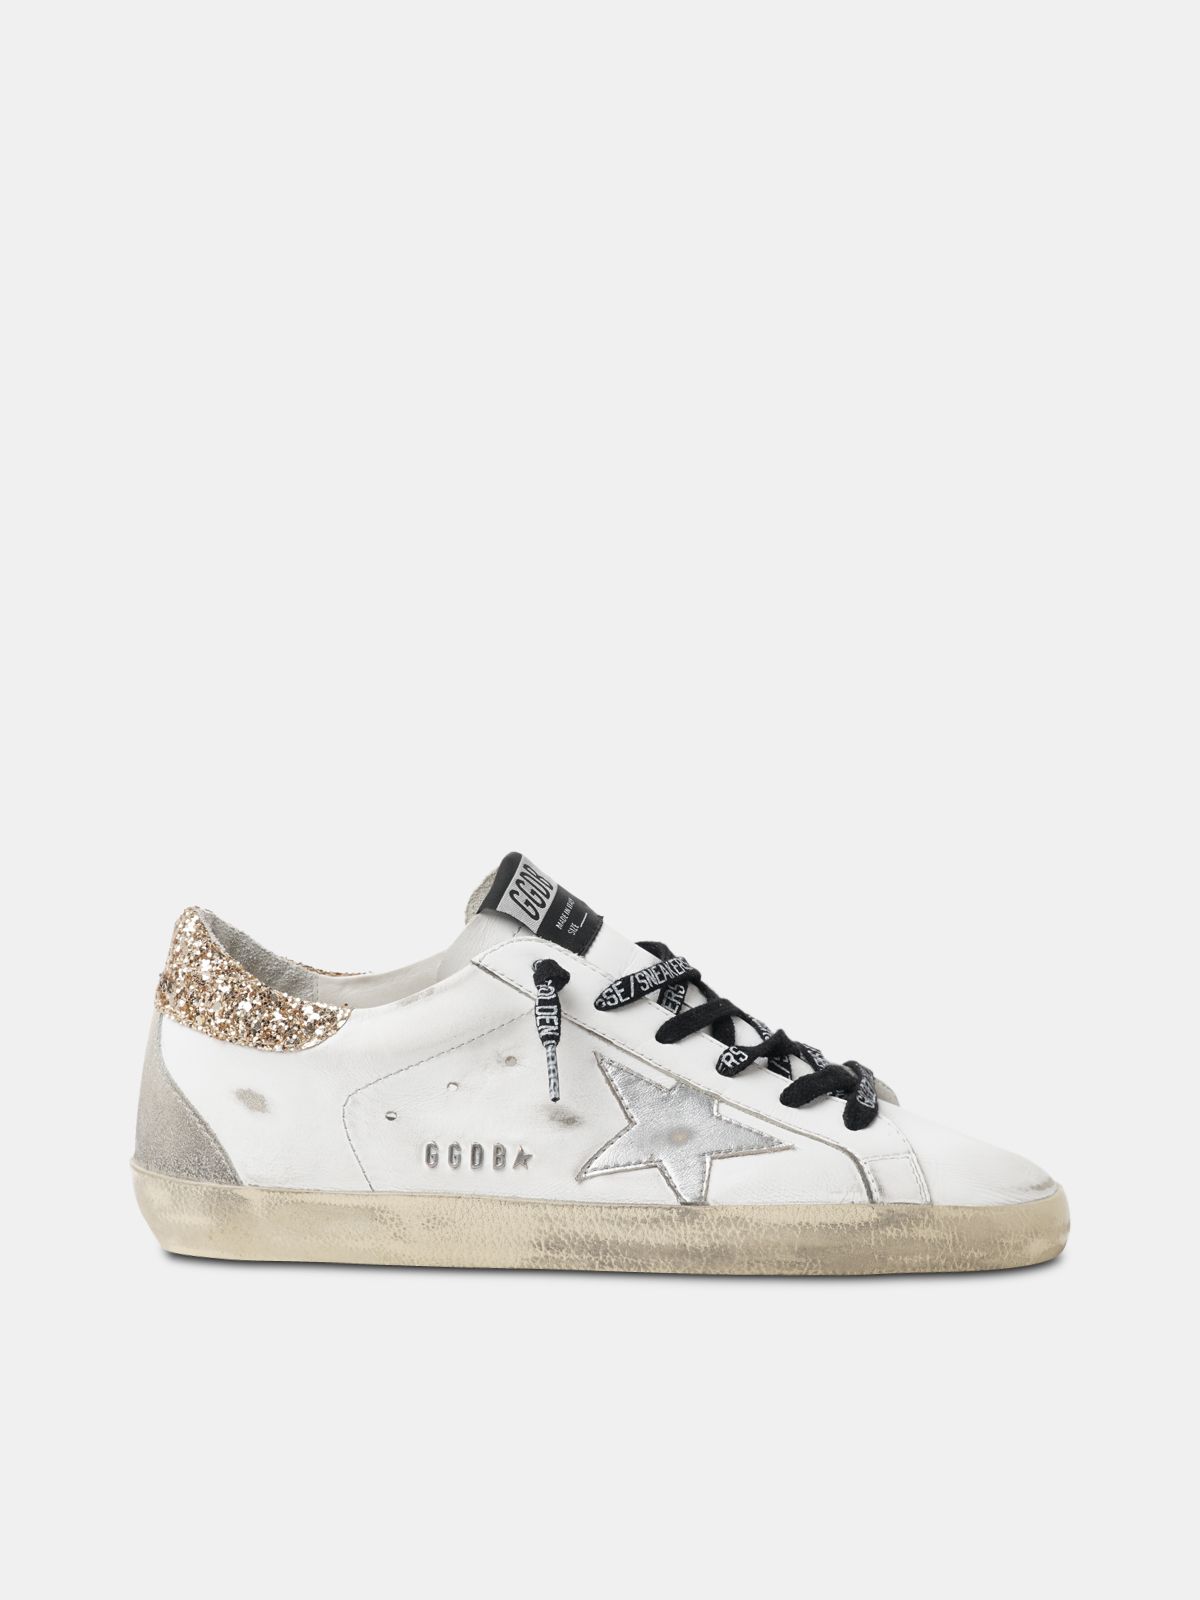 Sneakers Uomo Golden Goose White leather Super-Star sneakers with glittery heel tab